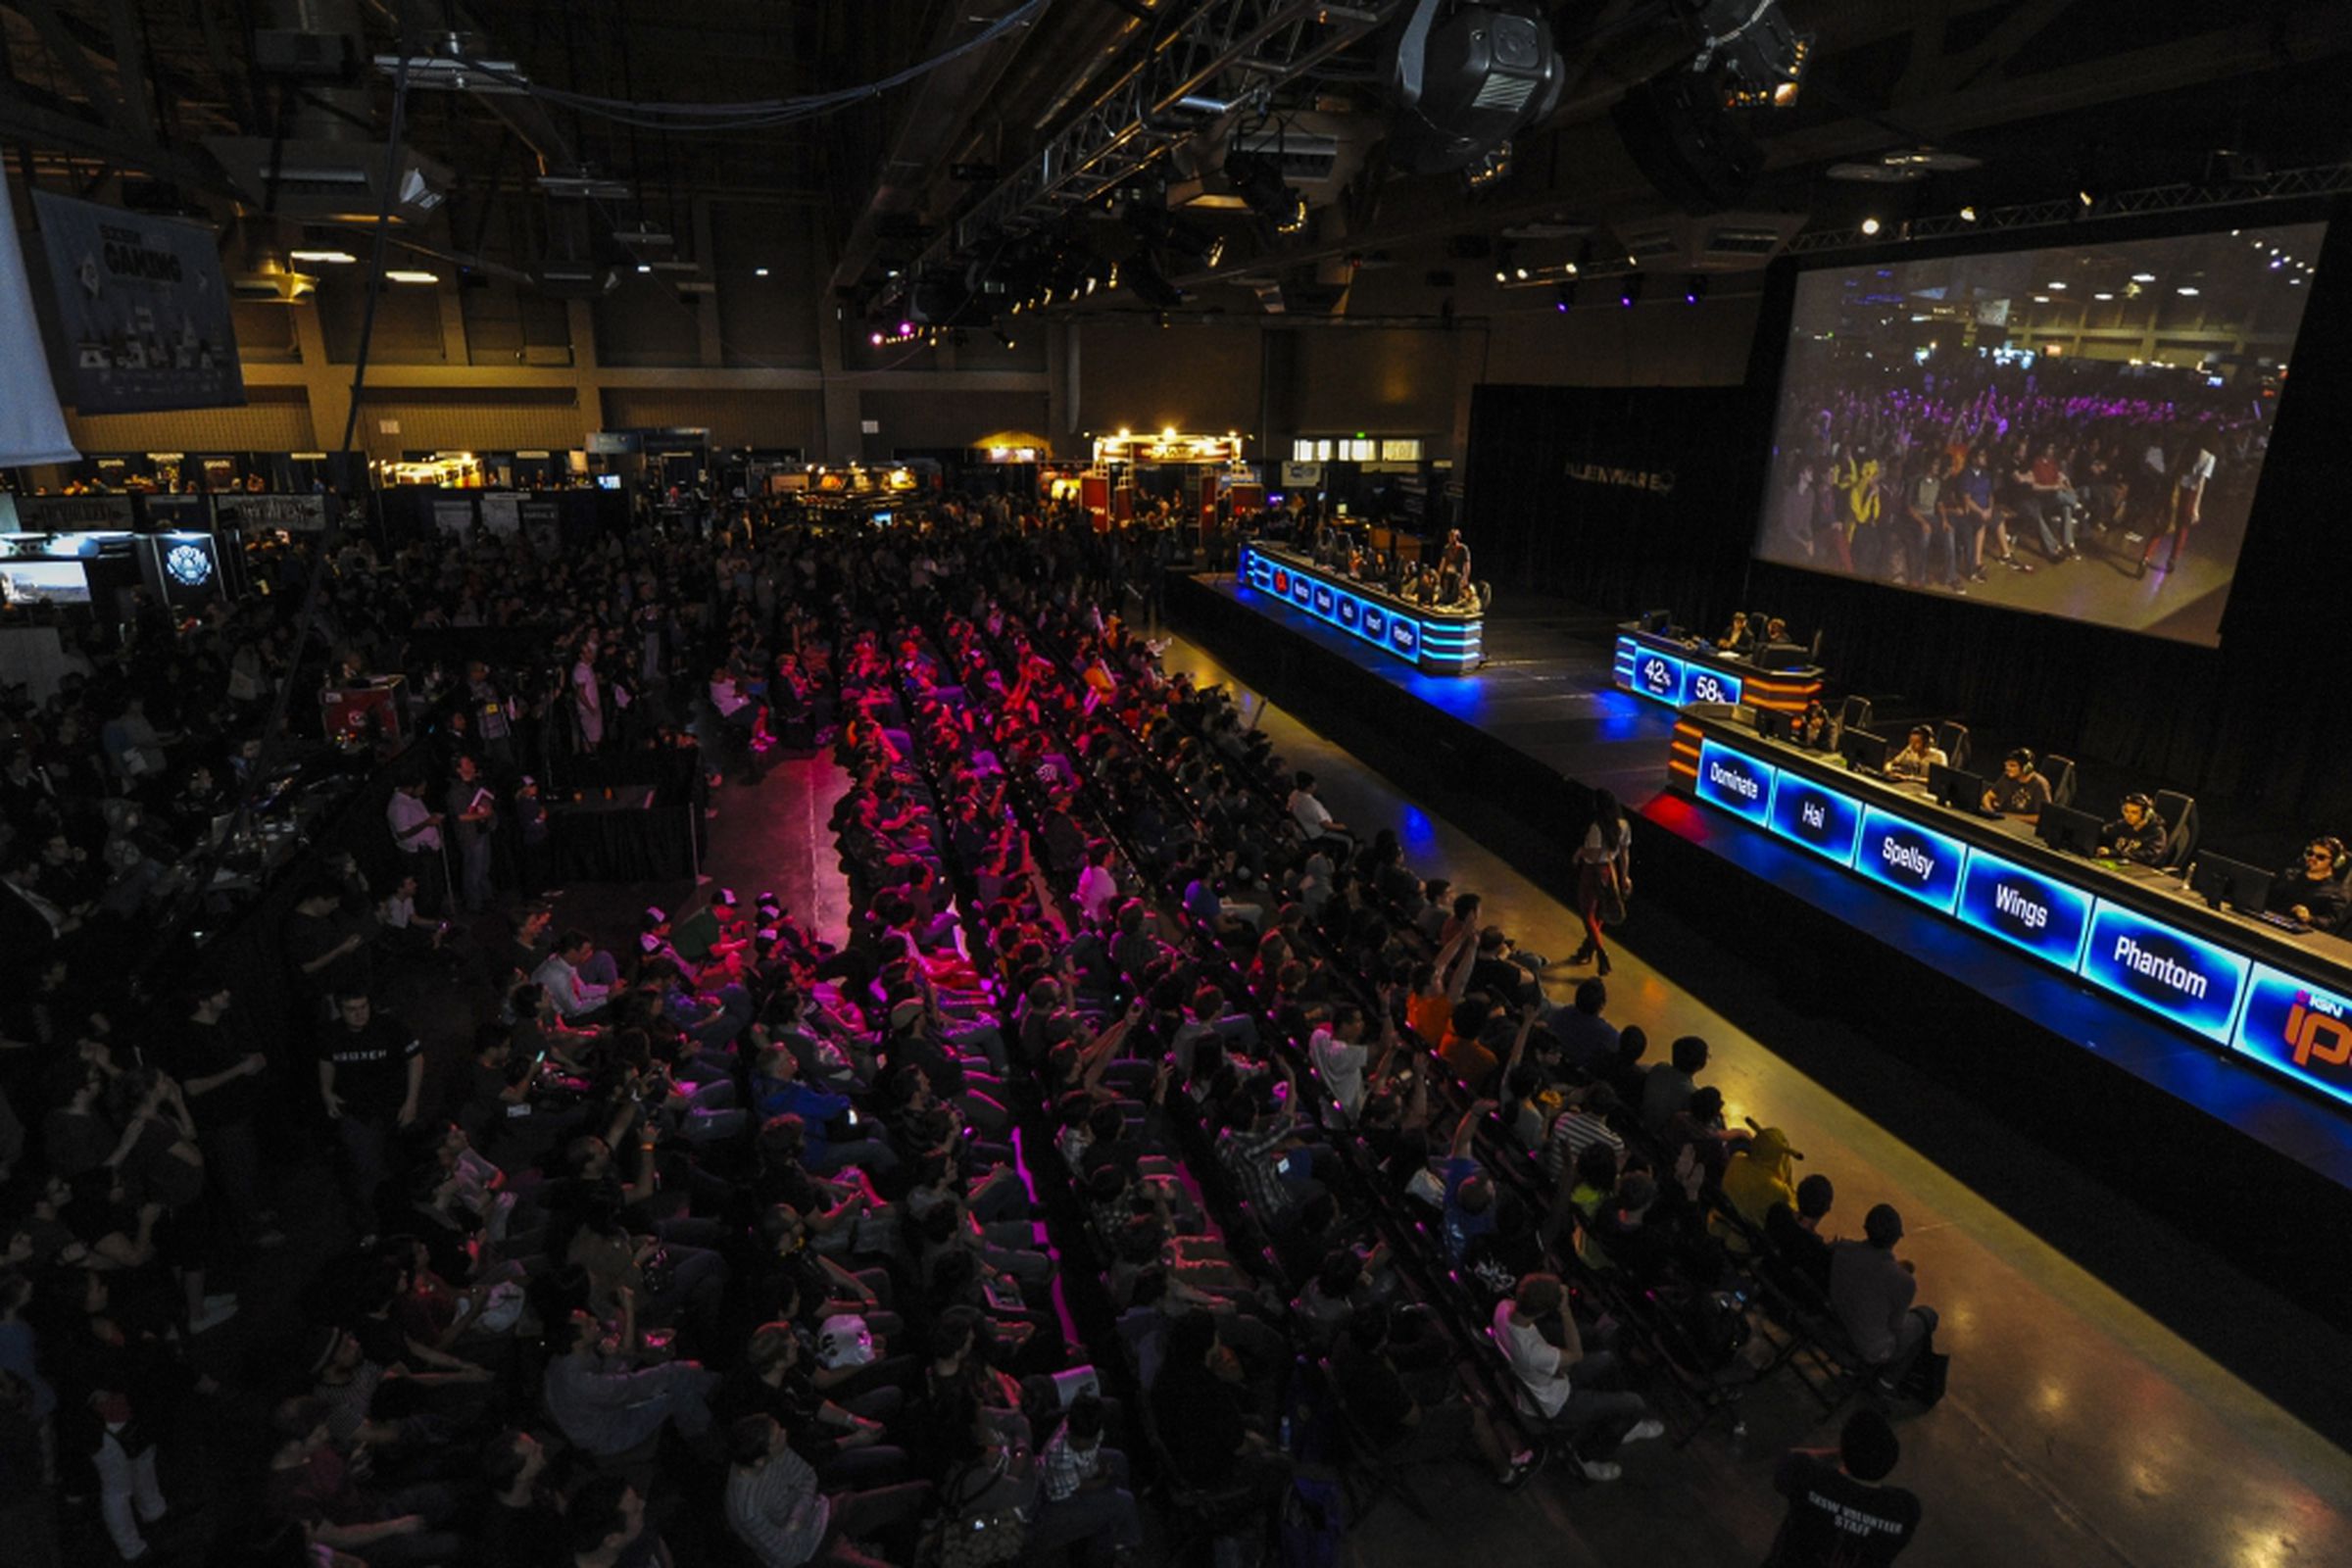 In previous years, the fierce competition at the Gaming Expo was the sportiest part of the event.